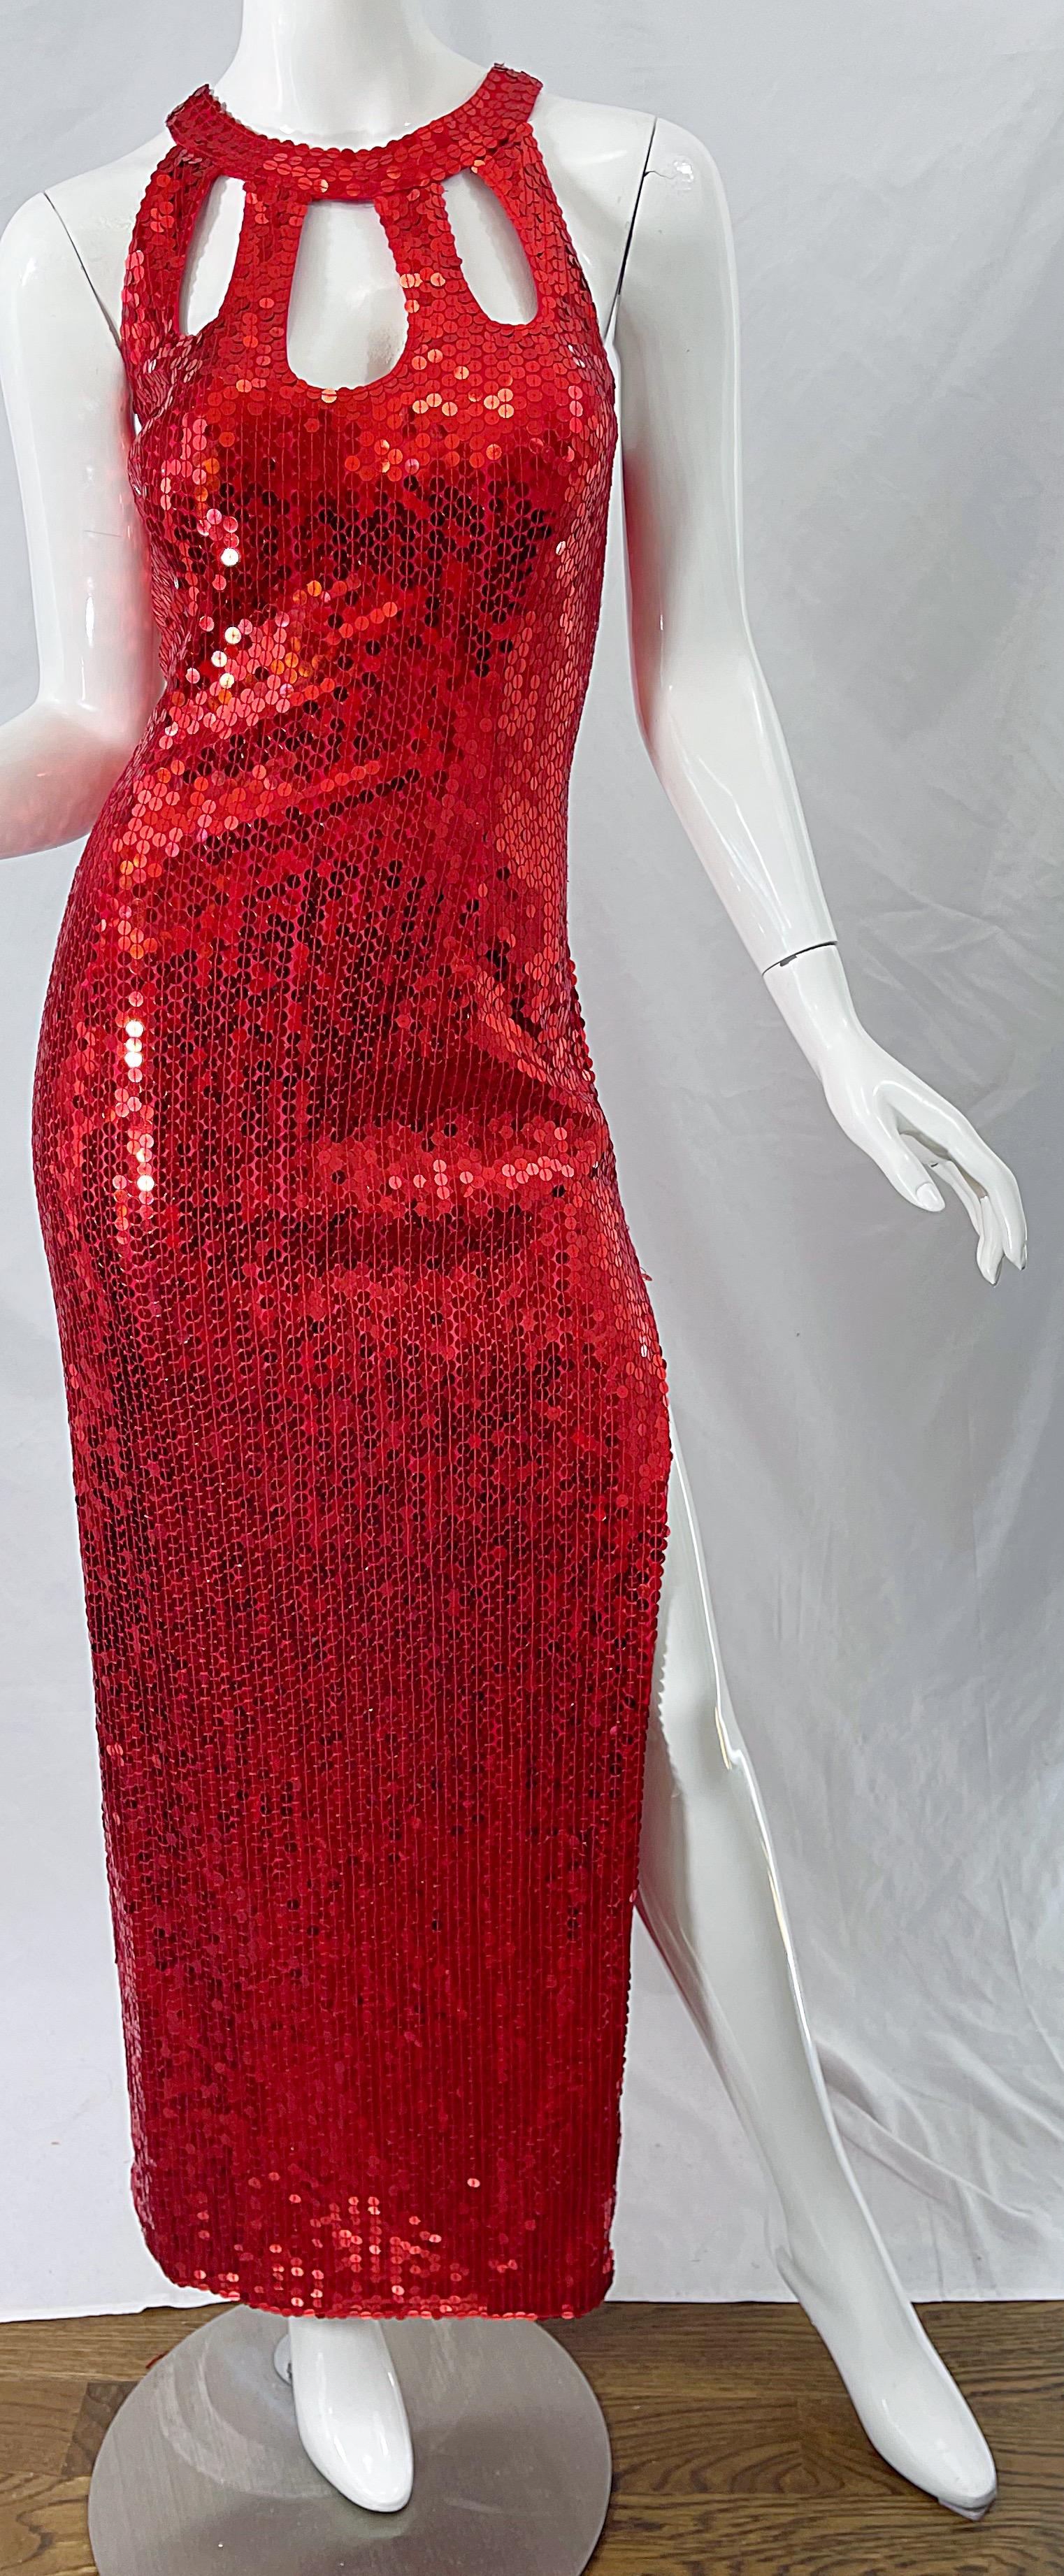 1990s Lipstick Red Sequin Size 10 Sexy Cut Out Vintage 90s Evening Gown Dress For Sale 1